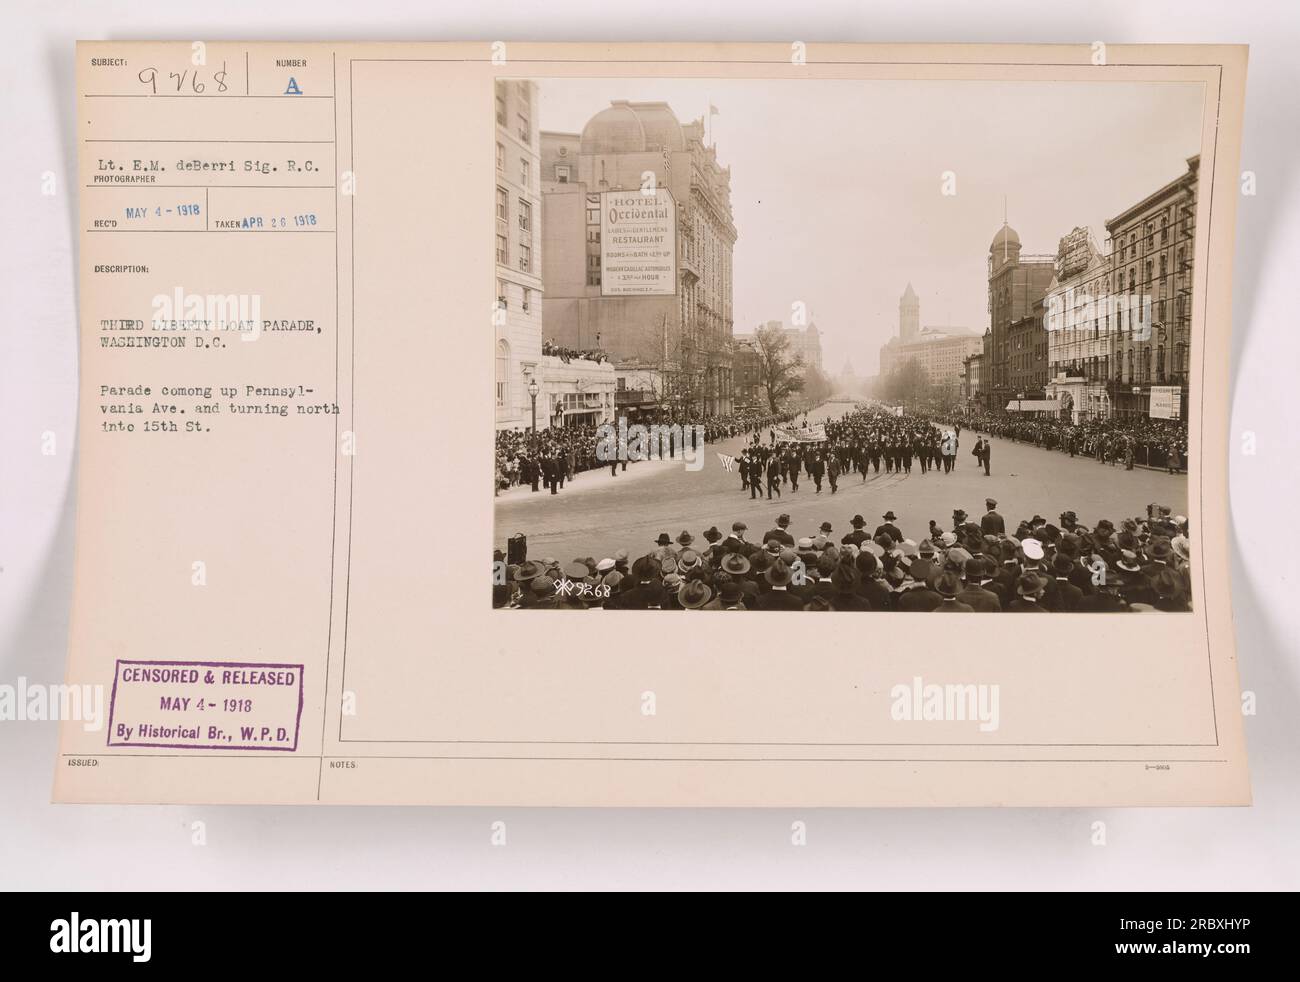 Lt. E.M. deBerri, a Signal Corps photographer, captured this photo on April 26, 1918, during the Third Liberty Loan parade in Washington D.C. The parade can be seen approaching Pennsylvania Avenue and turning north onto 15th Street. This image was censored and released on May 4, 1918, by the Historical Branch of W.P.D. Stock Photo